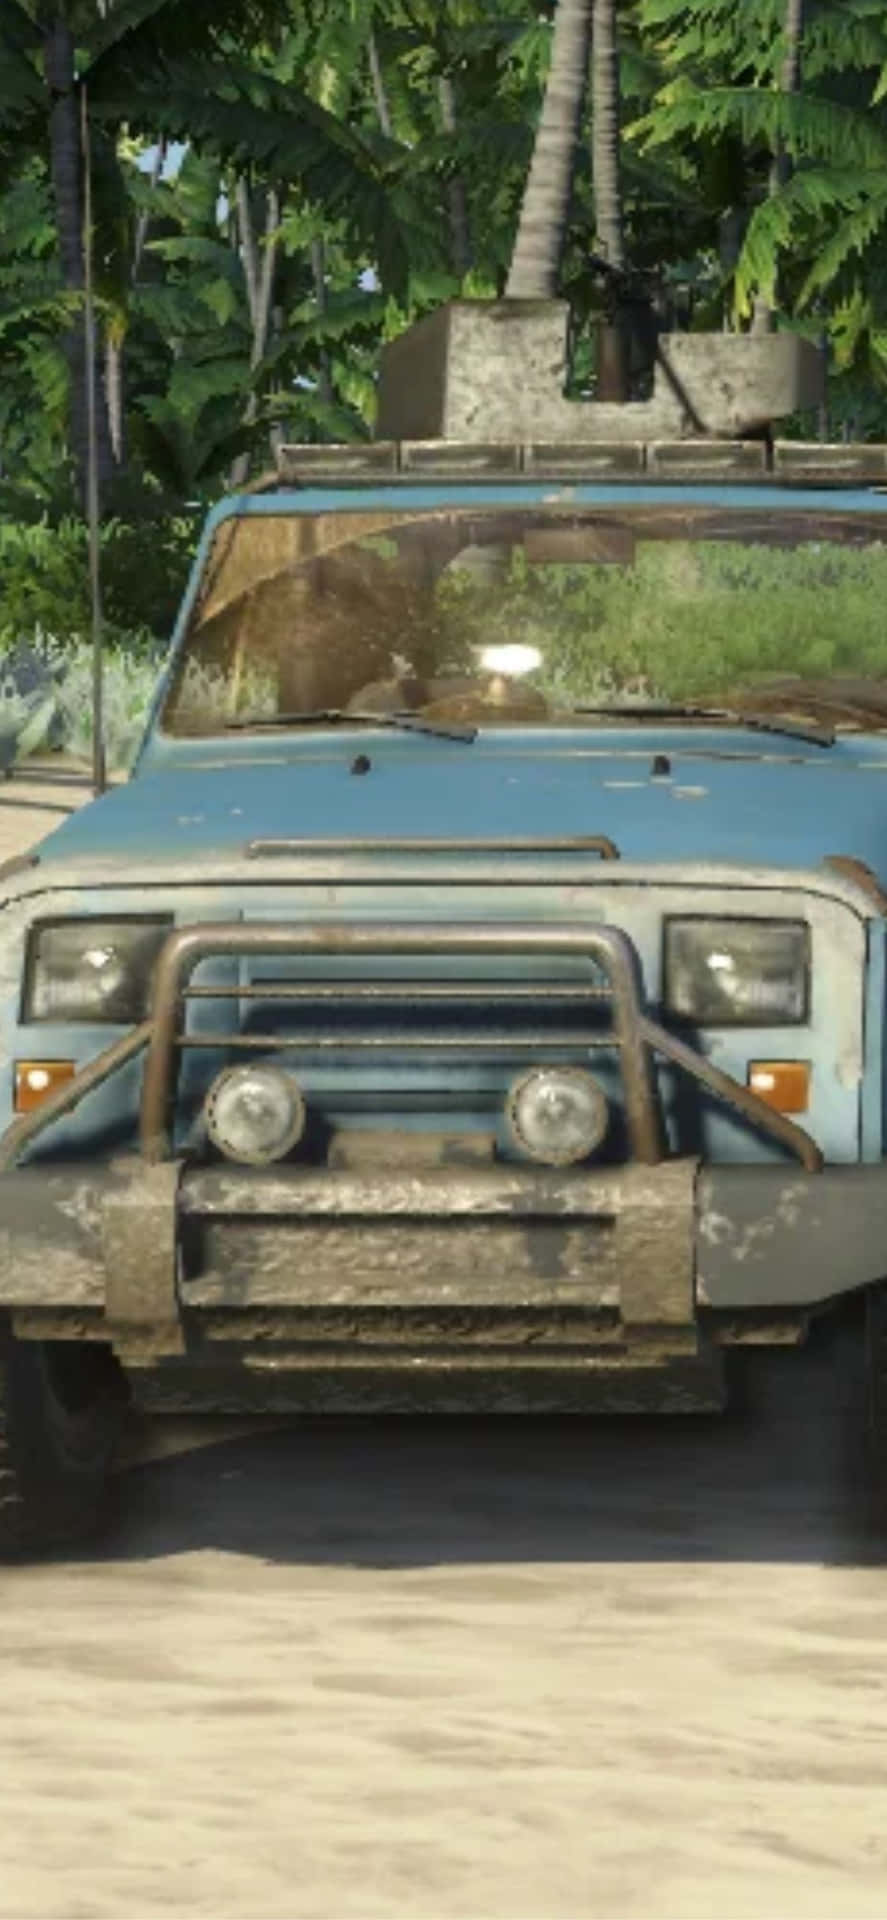 iPhone X Far Cry 3 Technical Truck Background